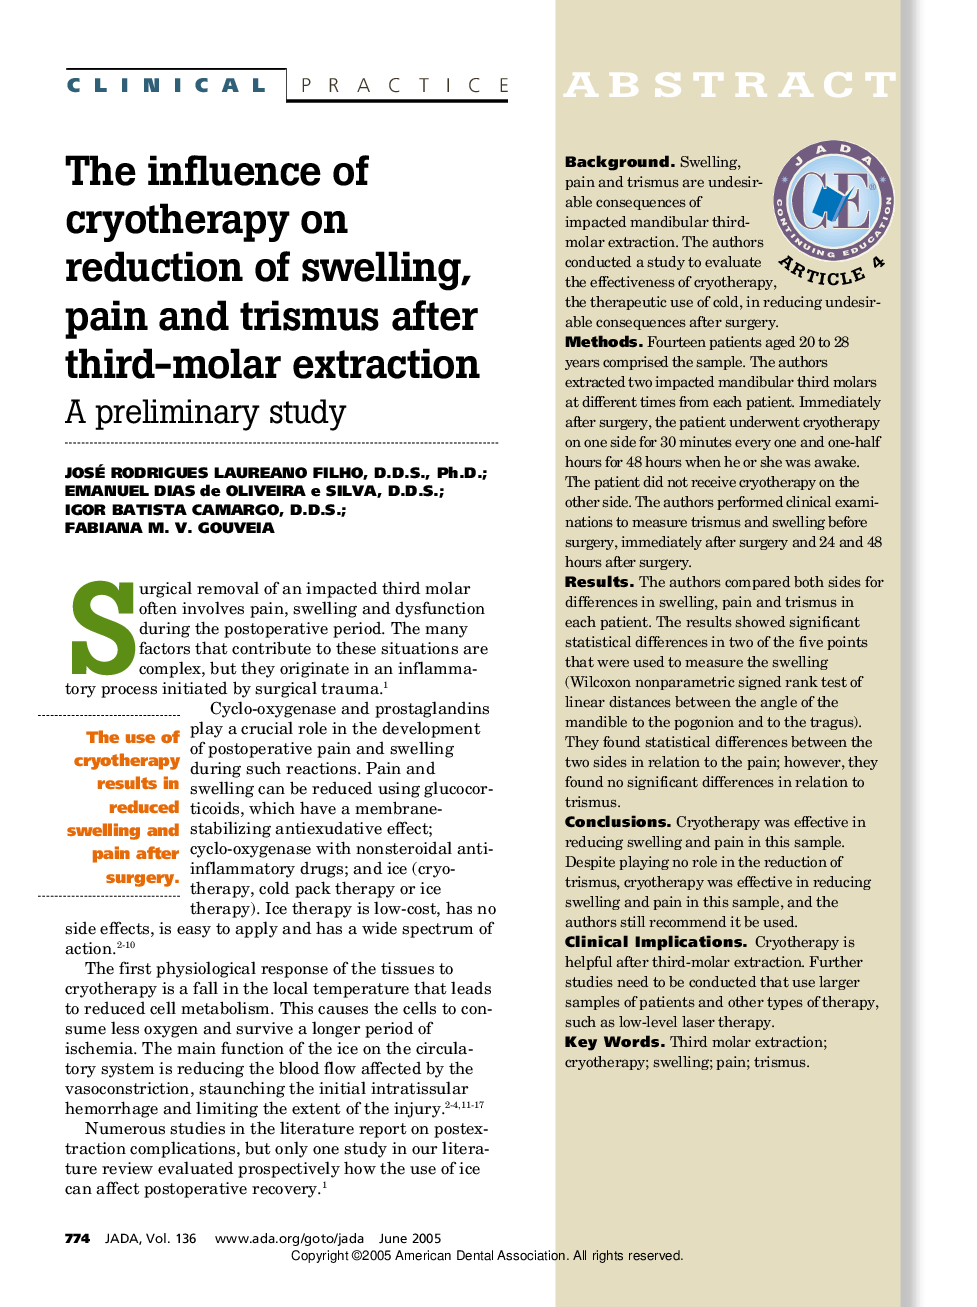 The influence of cryotherapy on reduction of swelling, pain and trismus after third-molar extraction